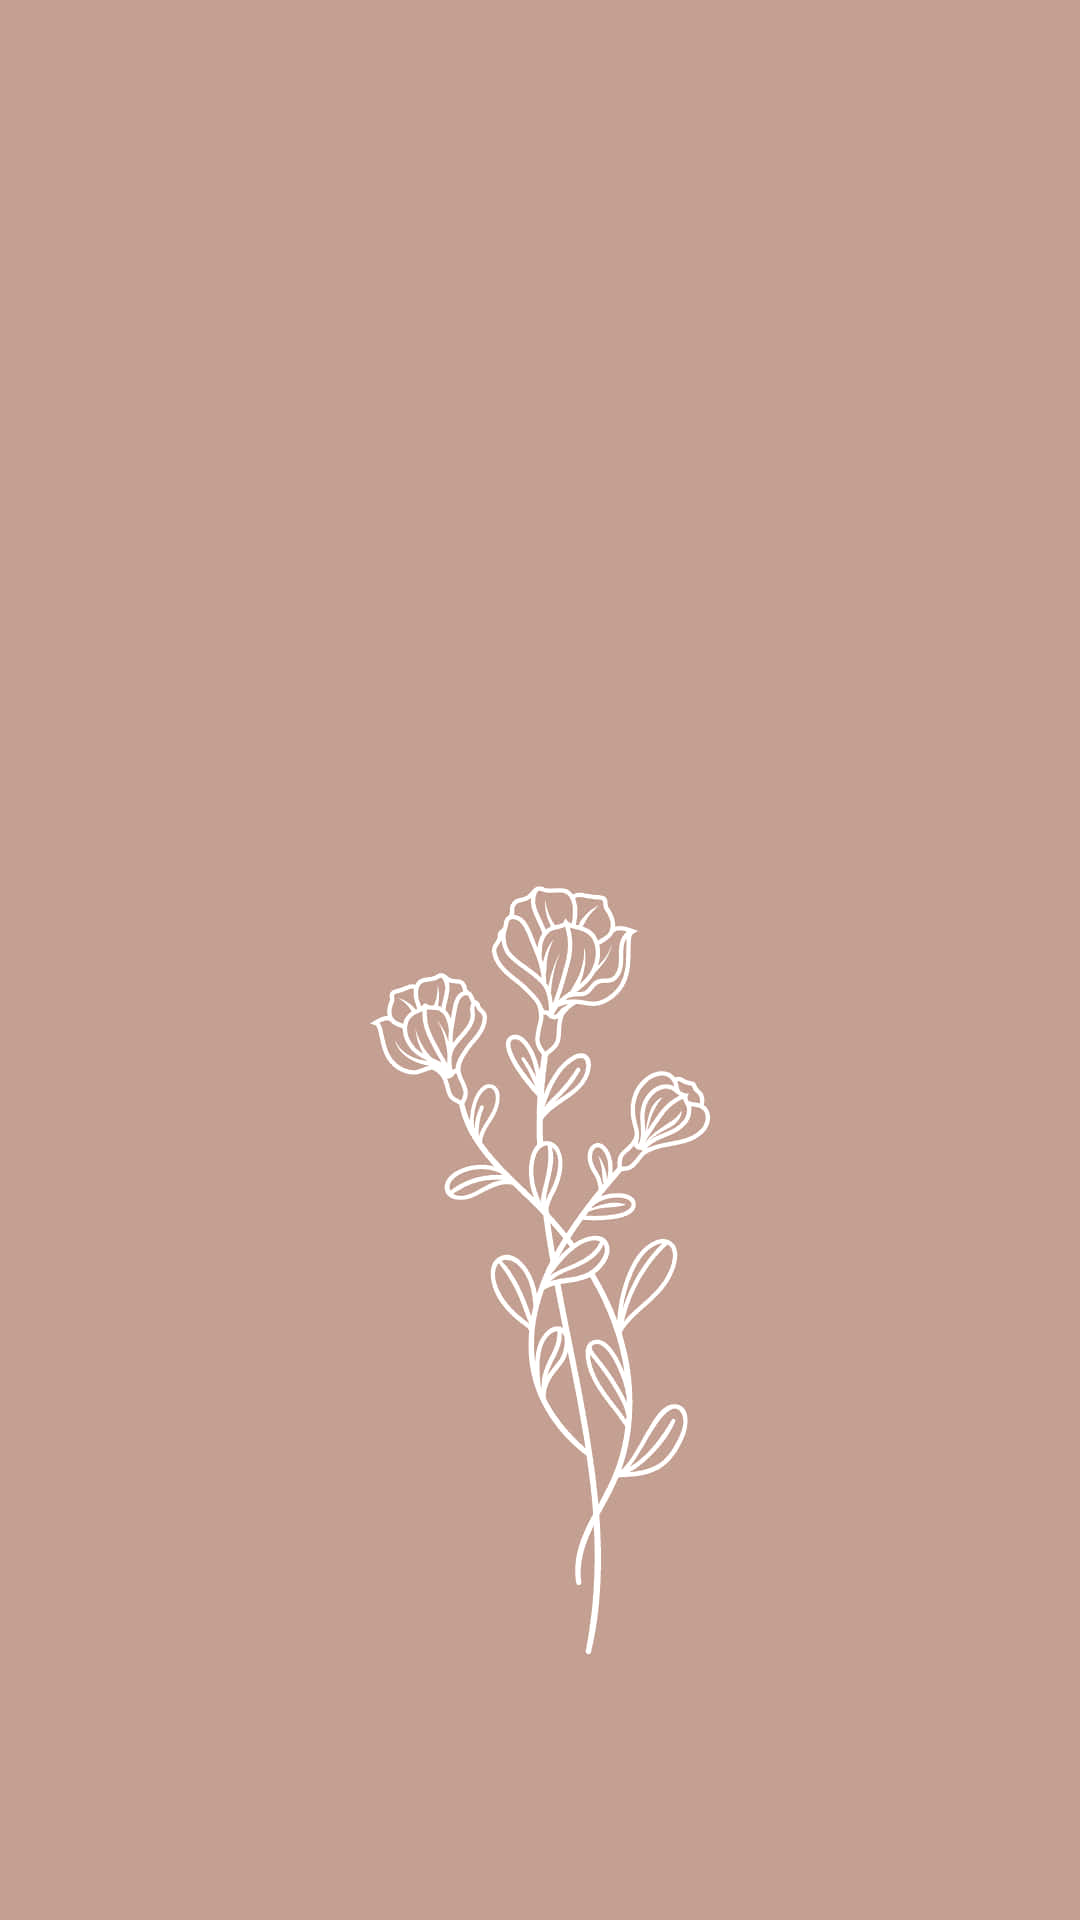 Pure Charming Flower Simple Pattern iPhone 6 Wallpaper Download  iPhone  Wallpapers iPad wallpapers   Flower iphone wallpaper Iphone 5s wallpaper  Floral iphone